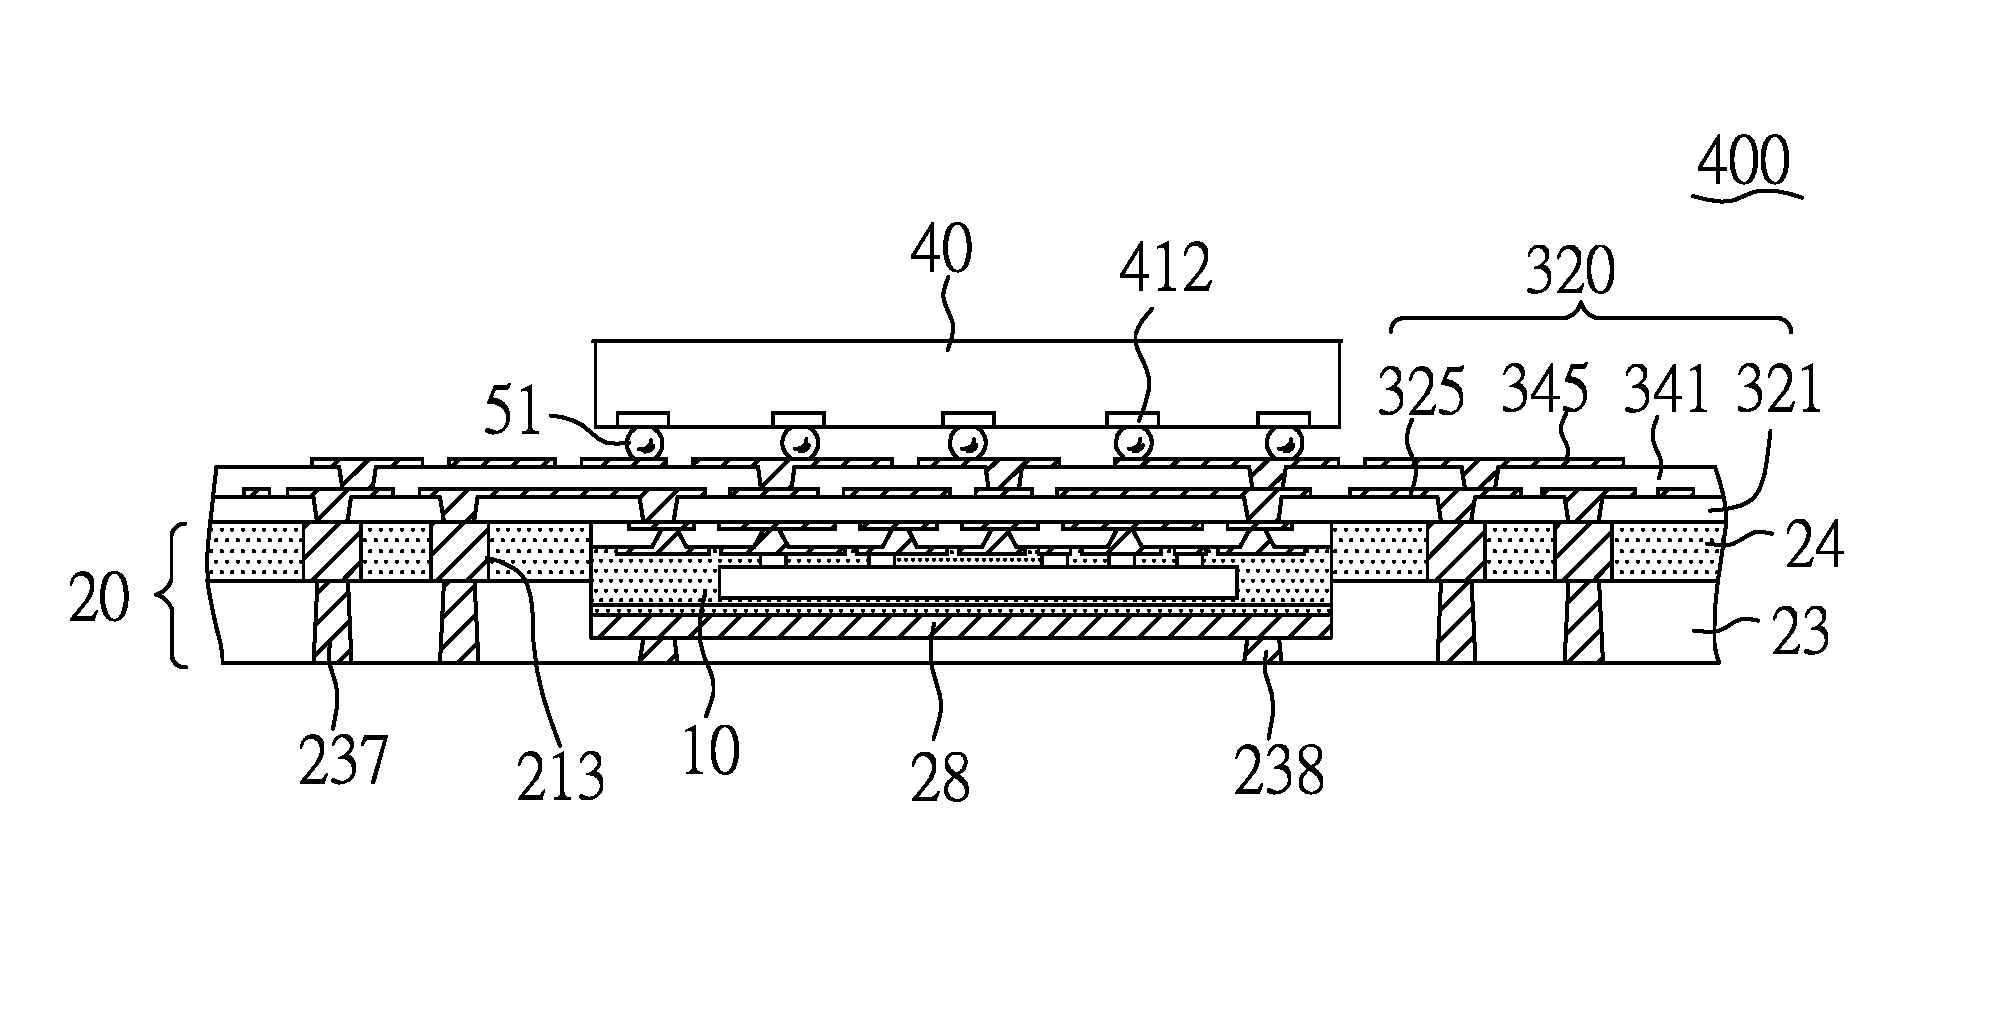 Face-to-face semiconductor assembly having semiconductor device in dielectric recess